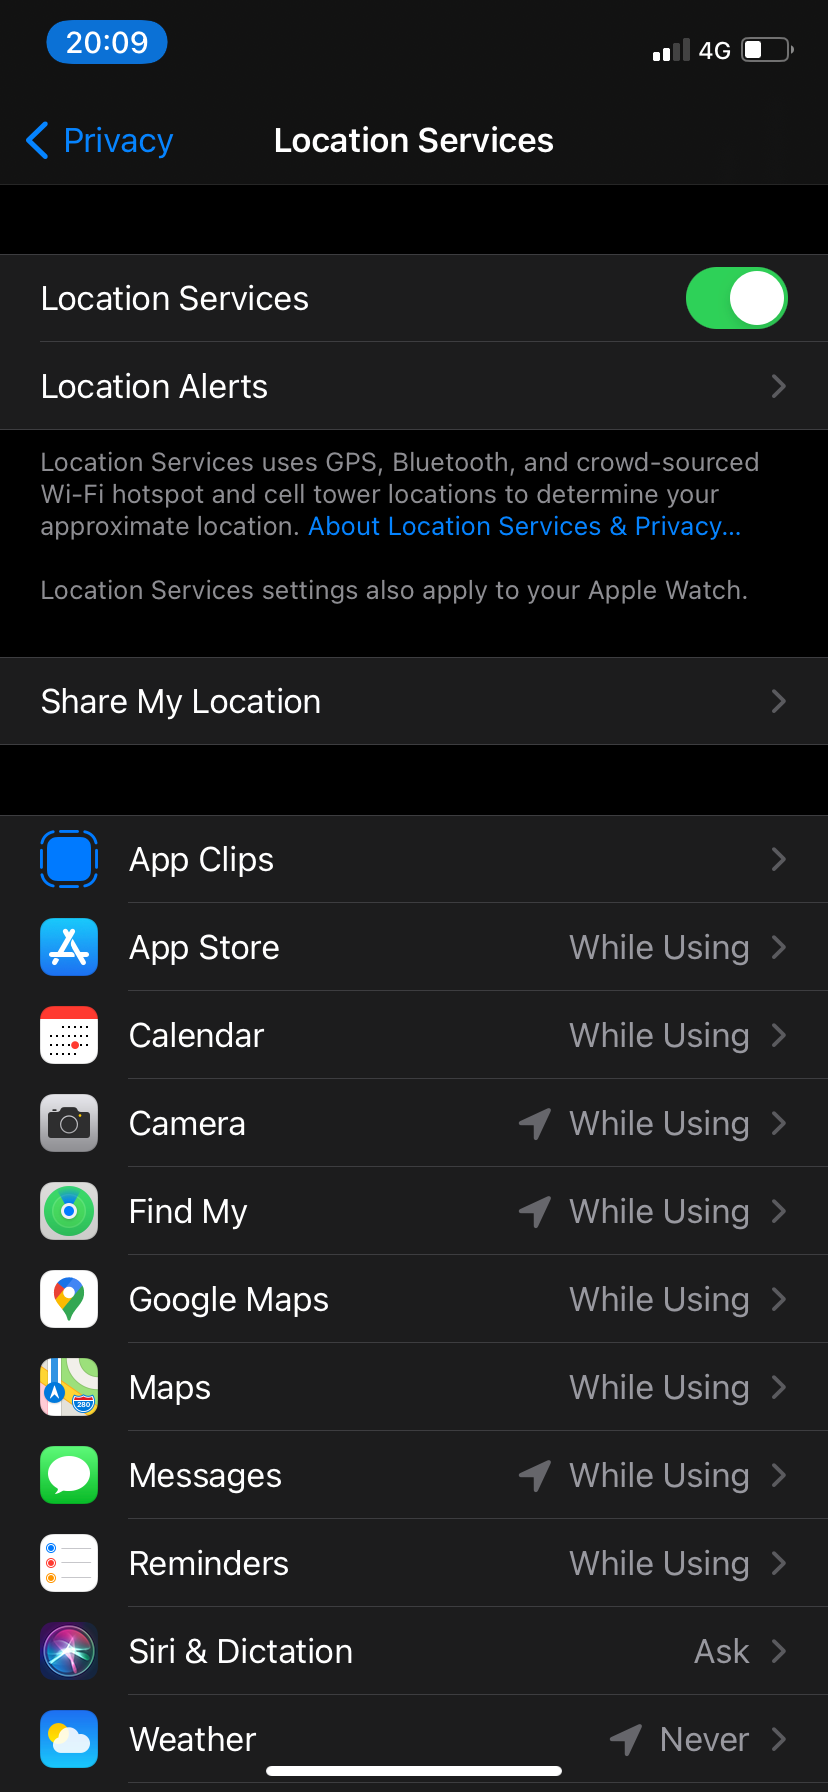 Location Services management screen.